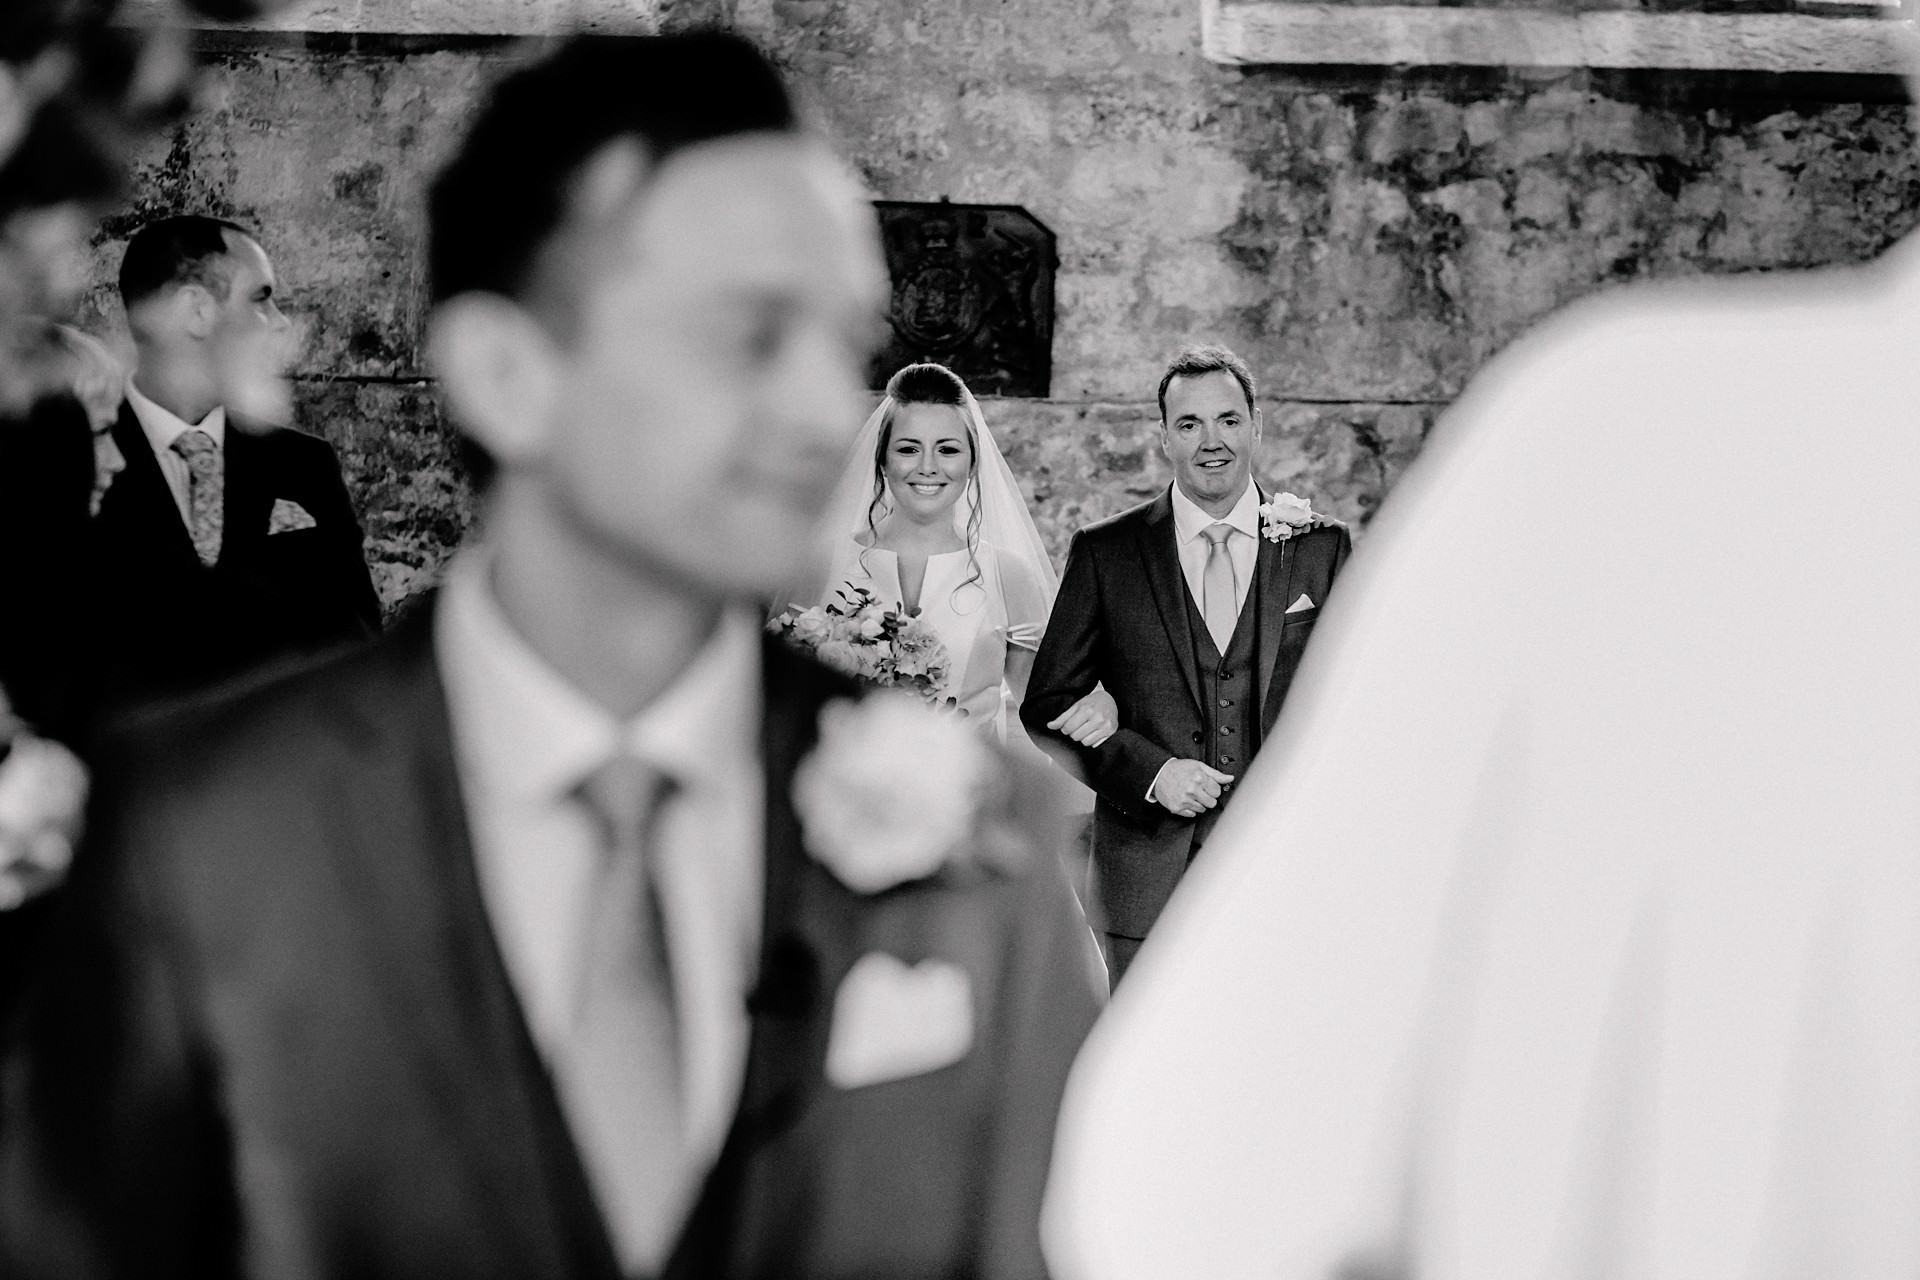 walkinbg down the aisle at blanchlands abbey, derwent water